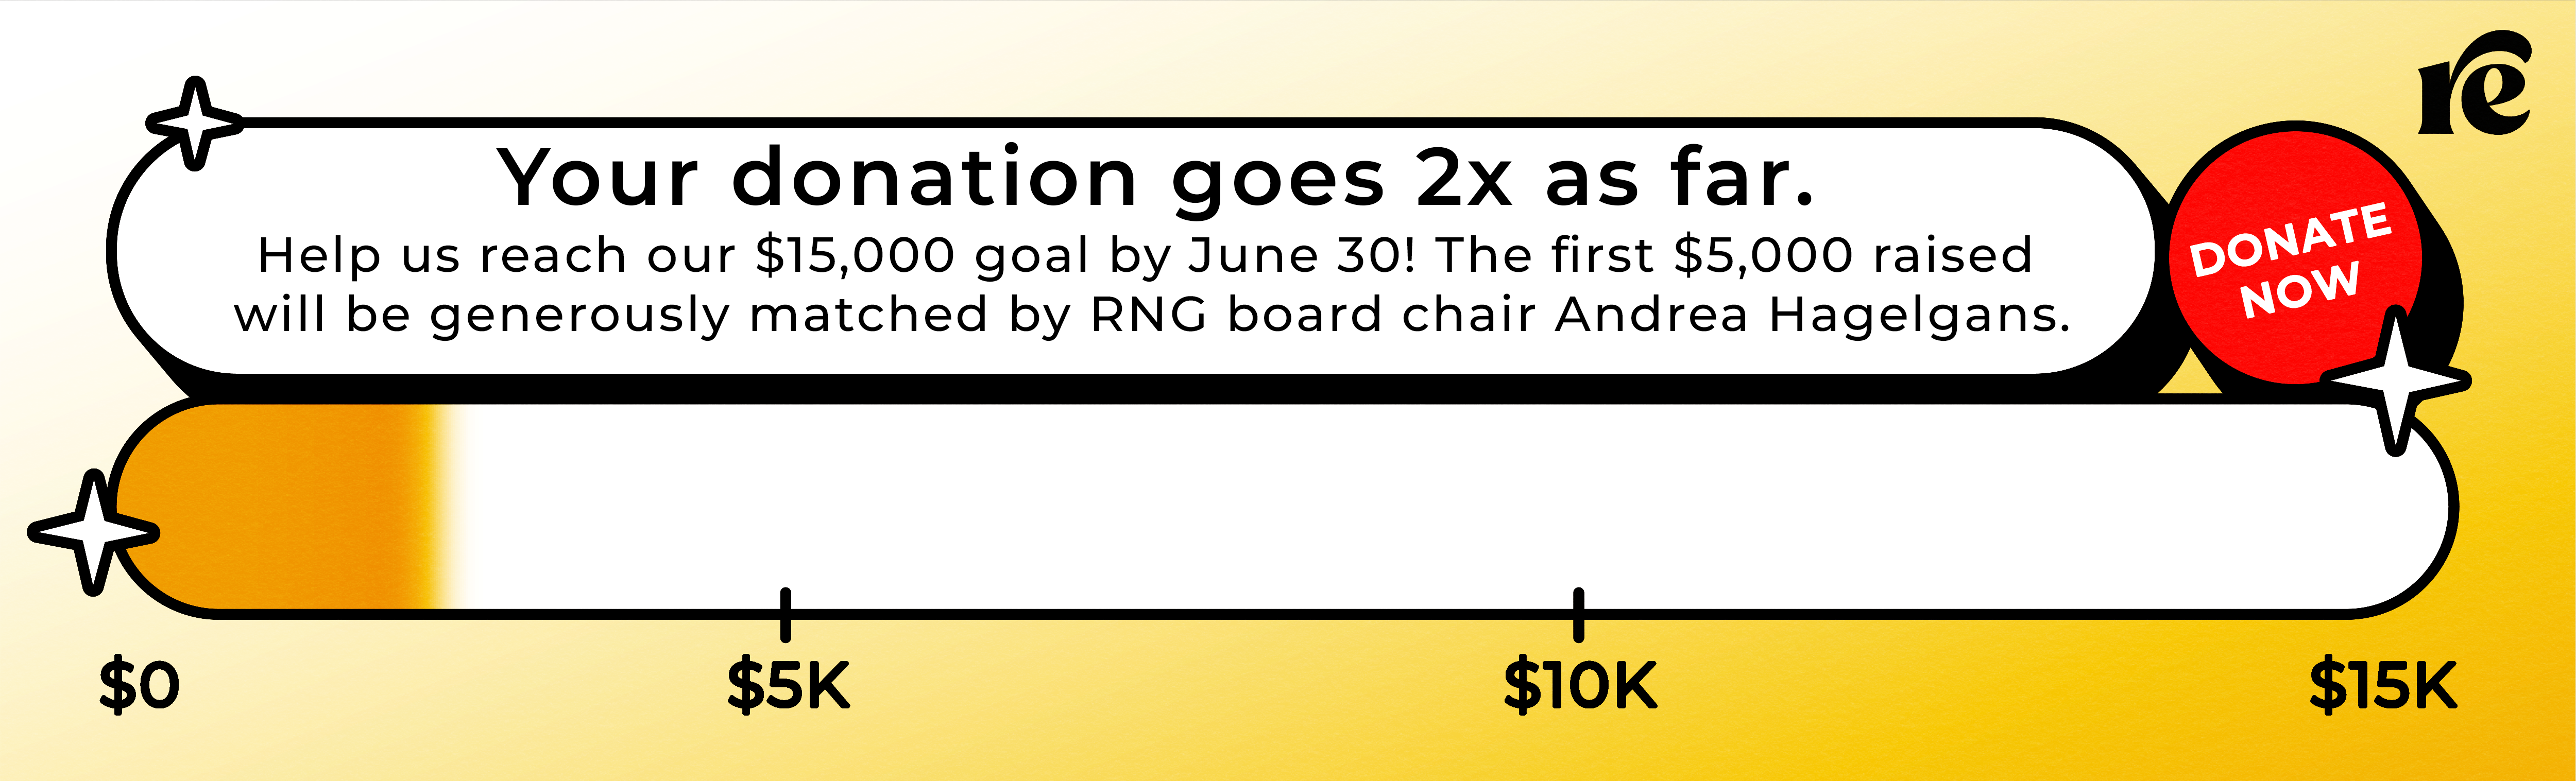 "Your donation goes 2x as far. Help us reach our $15,000 goal by June 30! The first $5,000 raised will be generously matched by RNG board chair Andrea Hagelgans. Donate Now!"  -  Image with yellow background text in box with sparkle stars, along with progress bar partially filled ranging from $0 to $15K, with red circle with  "Donate Now" inside.